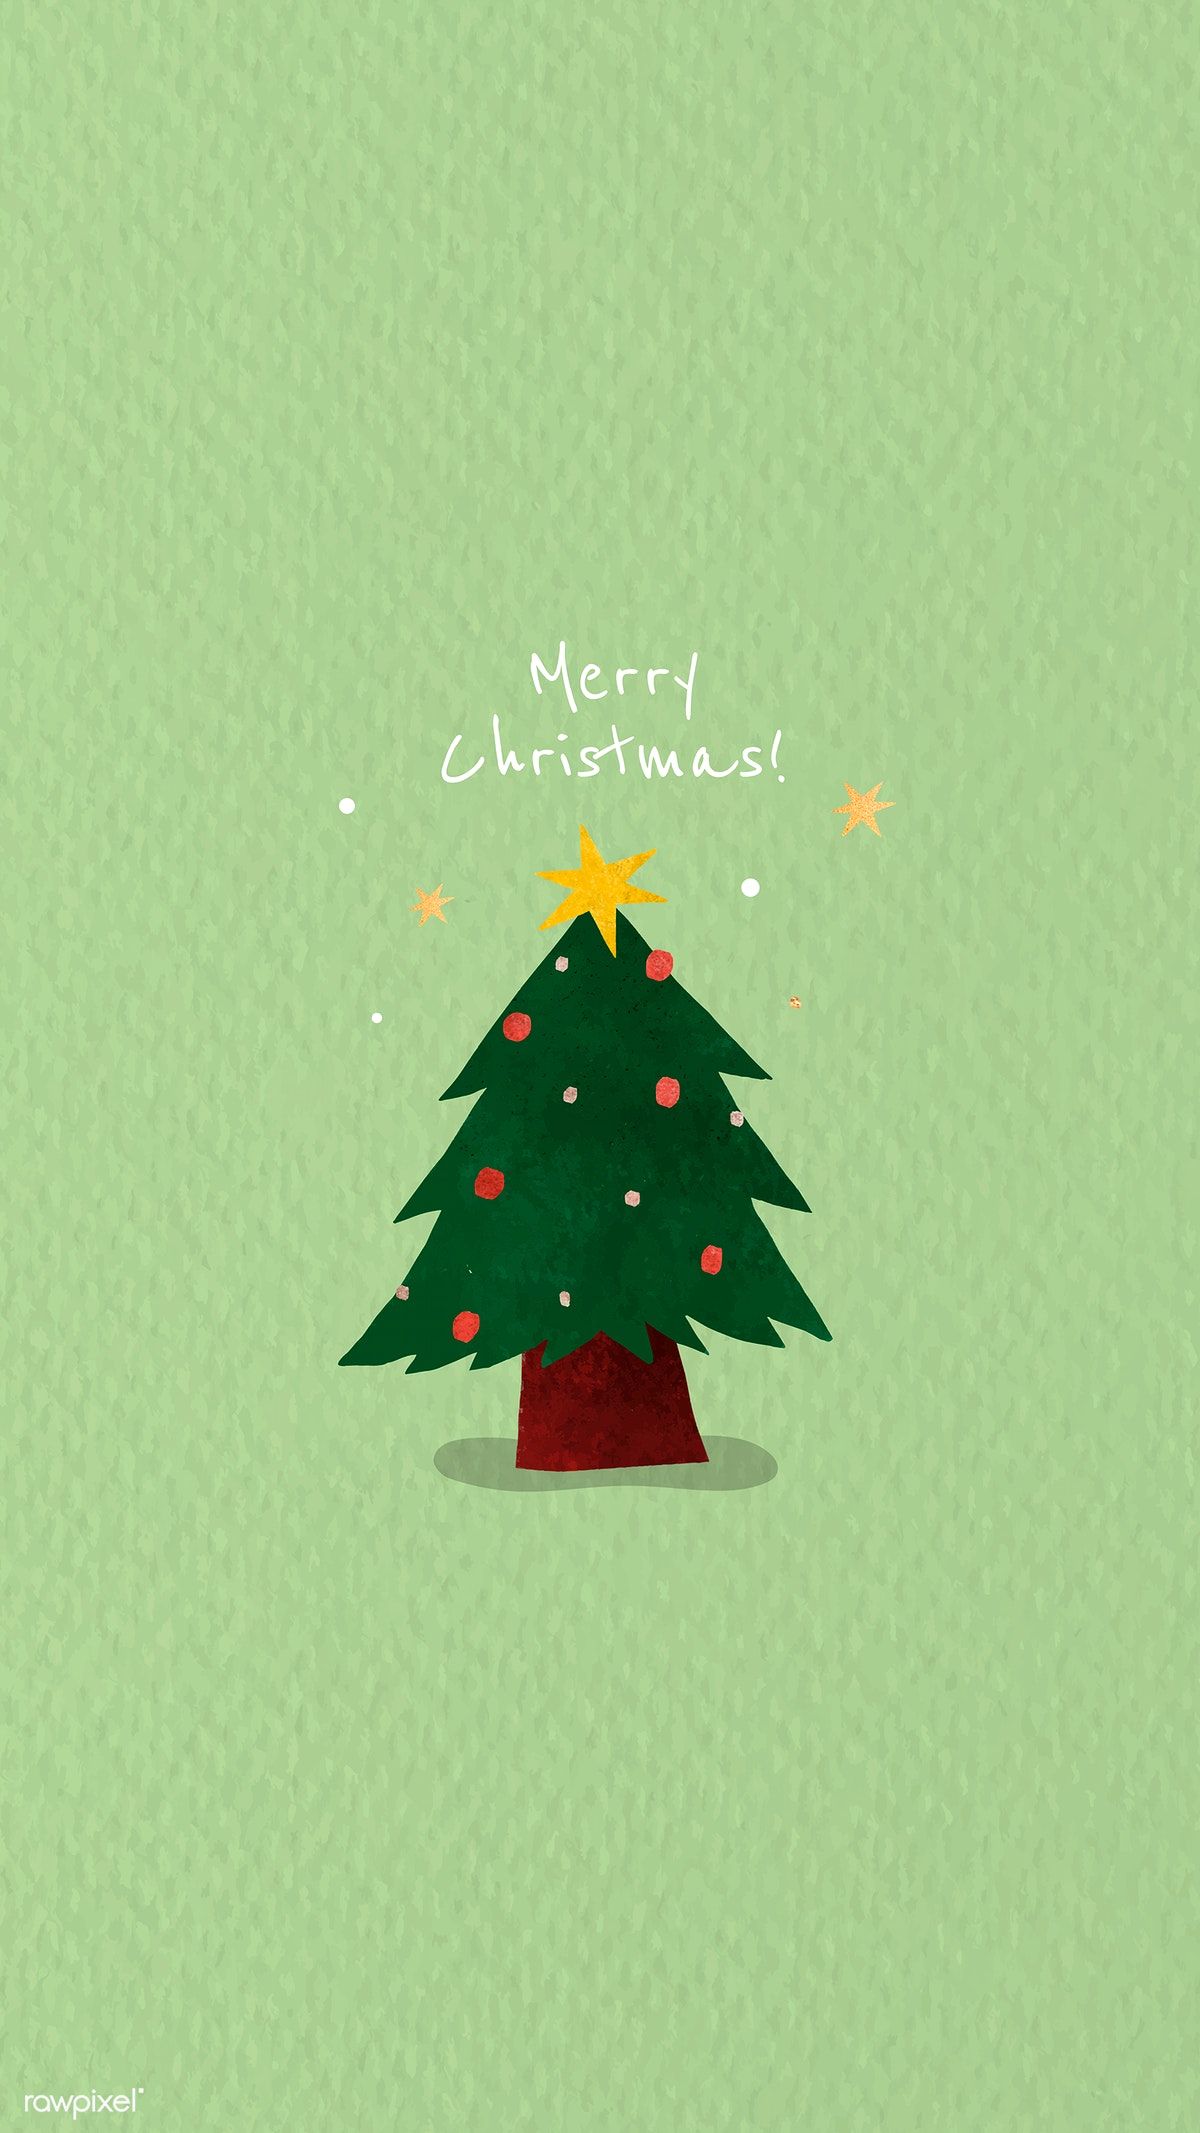 Download premium vector of Christmas tree doodle background vector by Toon about christmas wallpaper christmas christmas background golden green merry christmas and wallpaper christmas stars 1227270